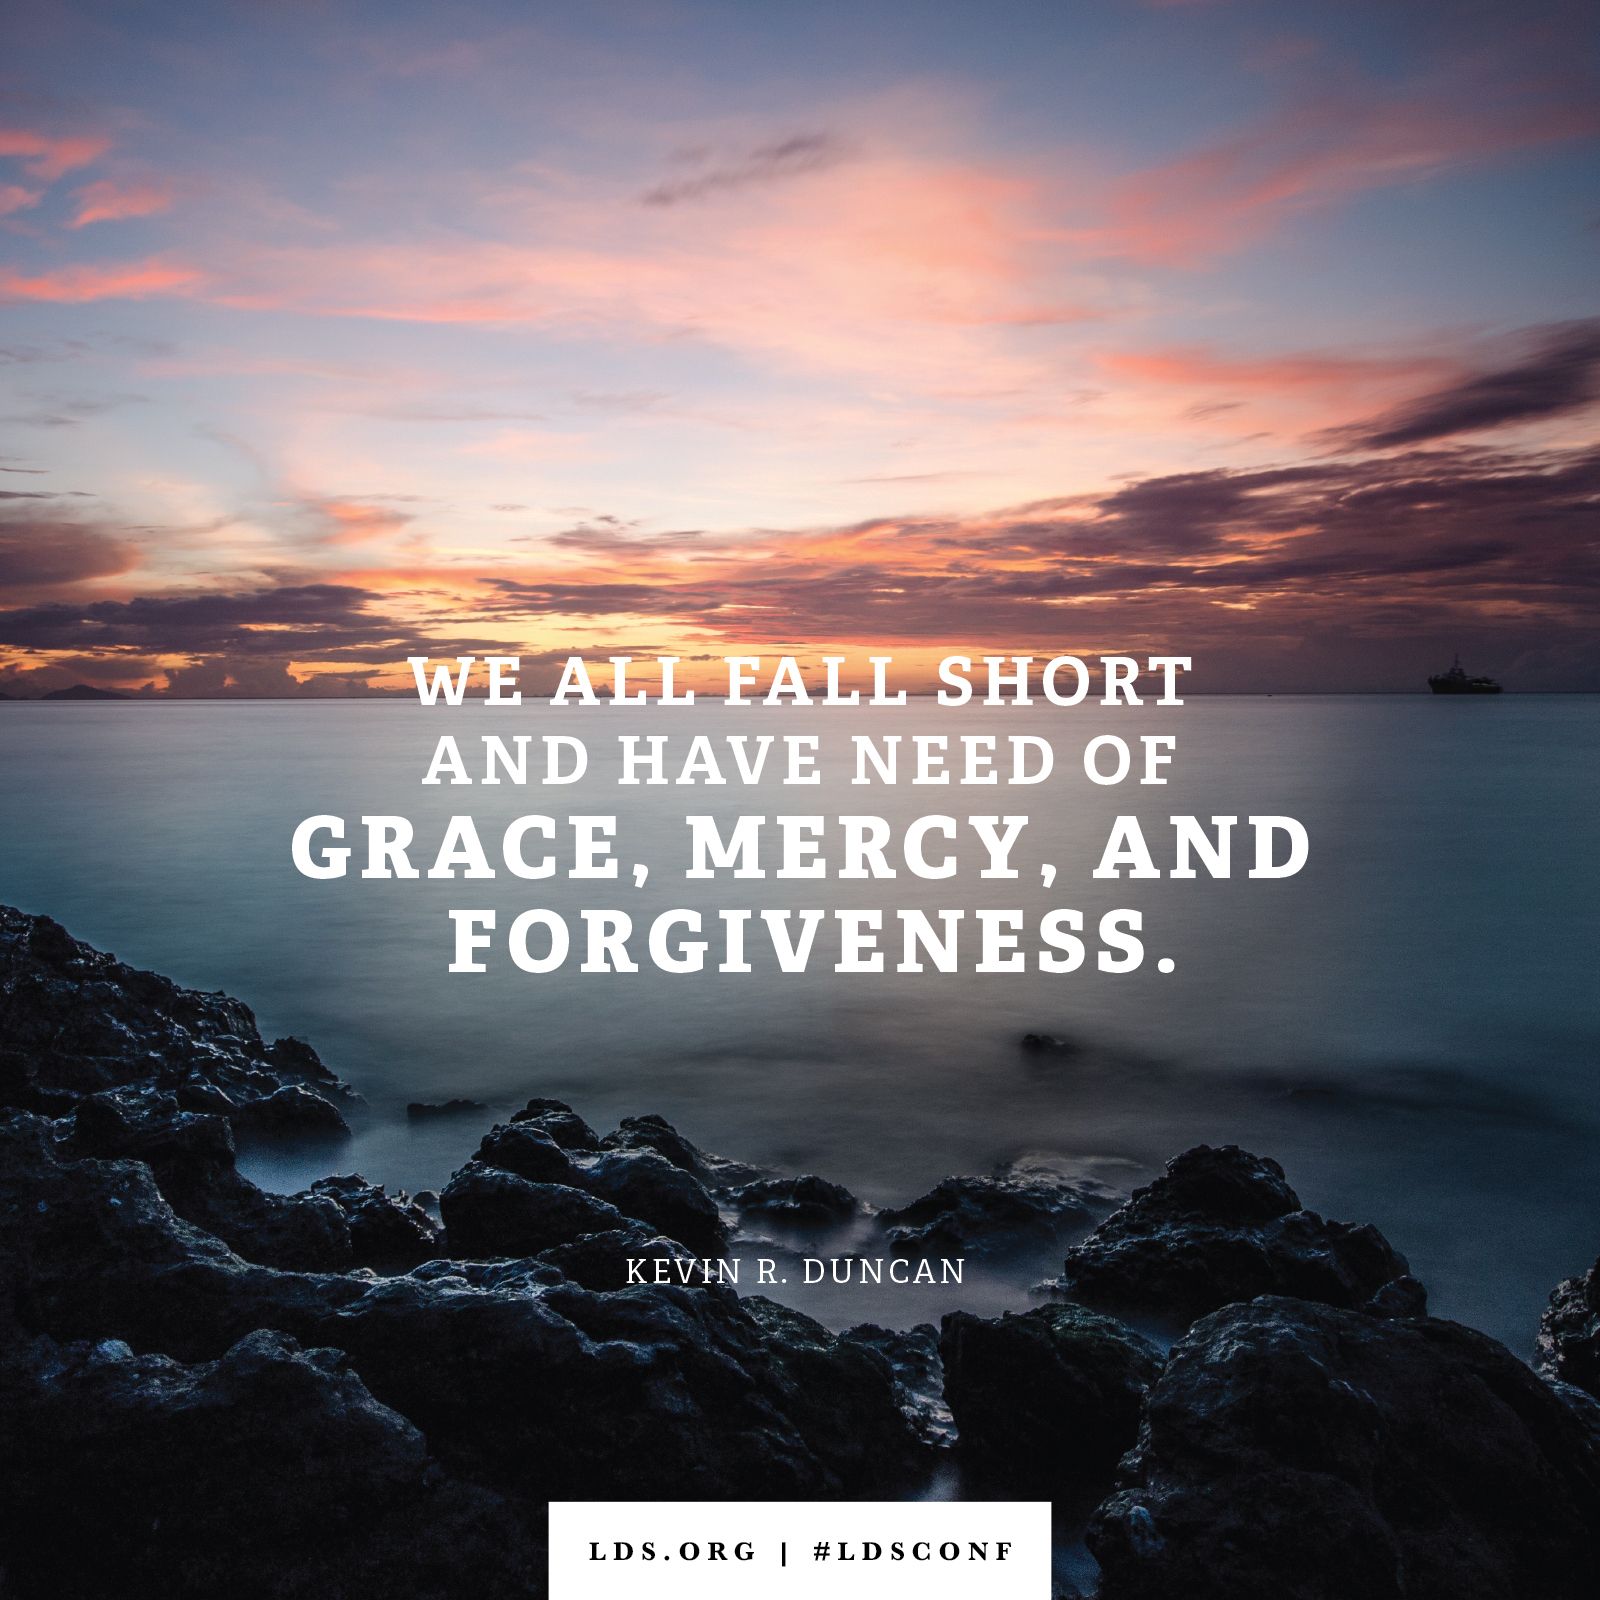 “We all fall short and have need of grace, mercy, and forgiveness.” —Elder Kevin R. Duncan, “The Healing Ointment of Forgiveness”